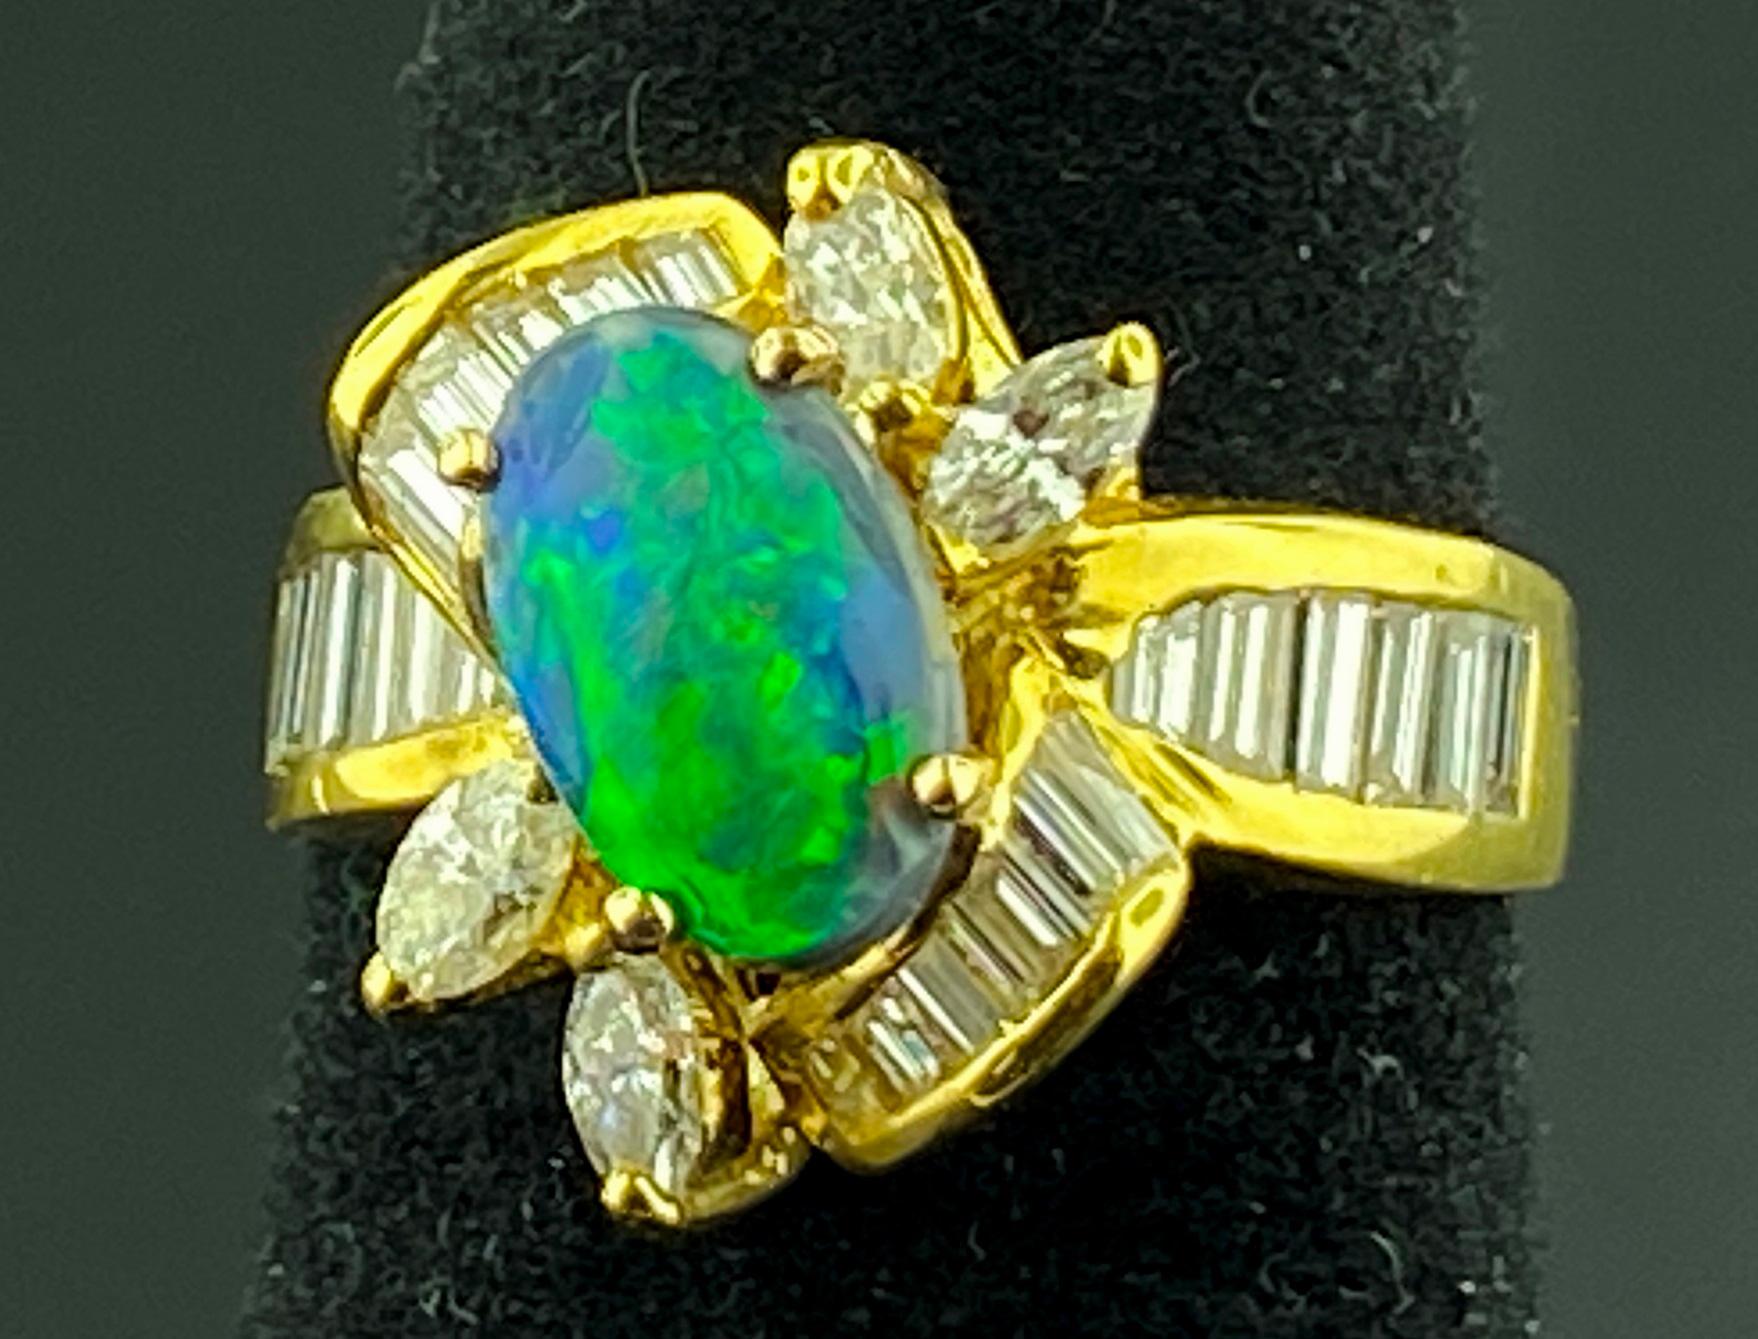 Set in 18 karat yellow gold is an Oval shaped 1.25 carat Black Opal with 4 marquise cut diamonds with a weight of 0.50 carats and 18 baguette cut diamonds with a weight of 0.50 carats, total diamond weight of 1.00 carats.  Color is G, Clarity is VS.